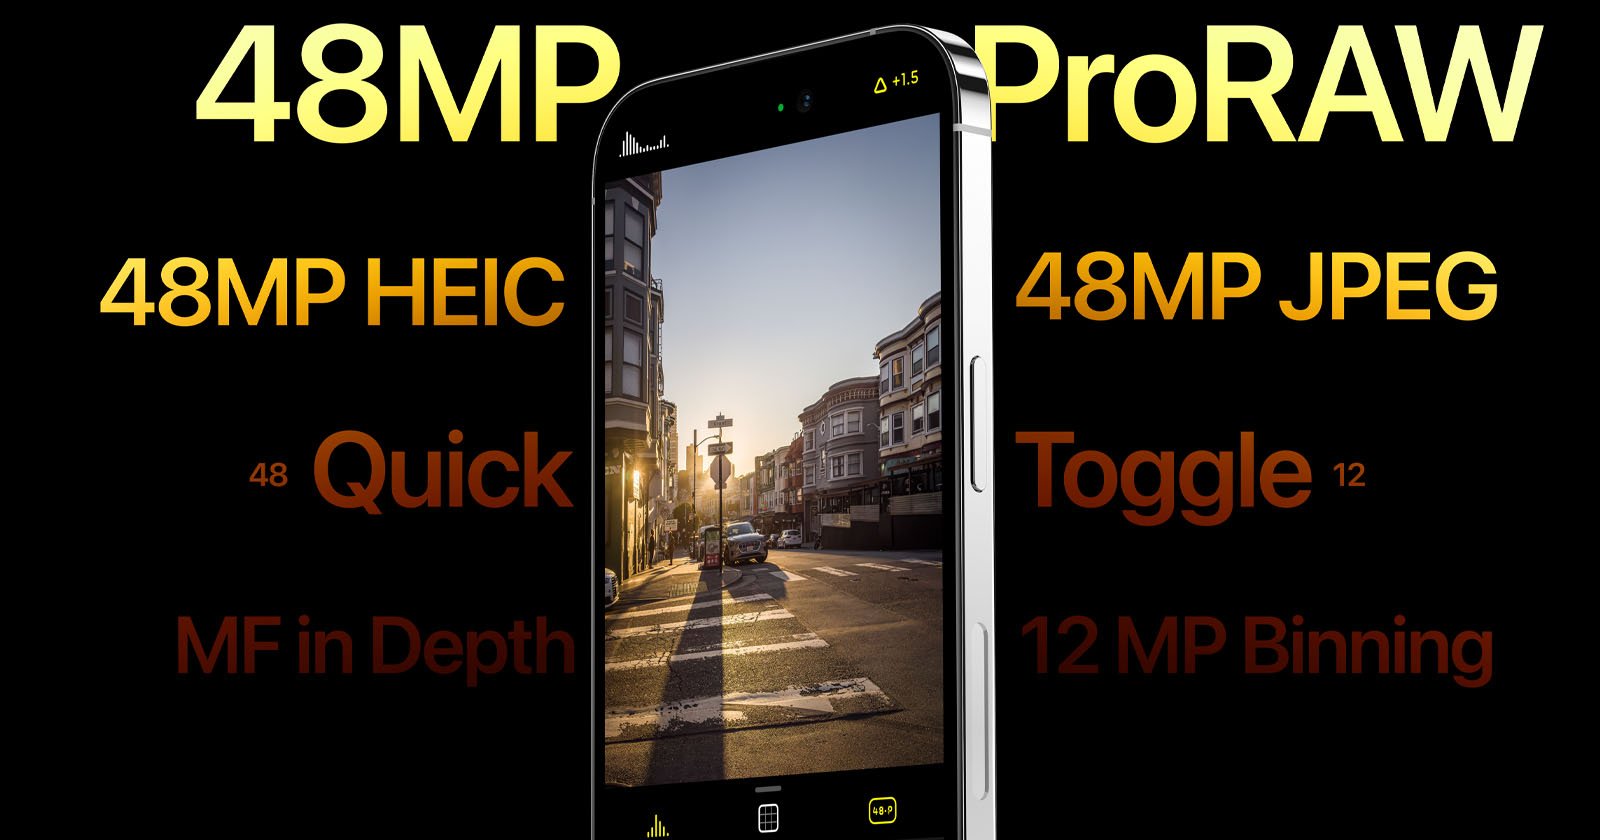 Update to Halide Adds 48MP ProRAW and Manual Focus Depth Capture